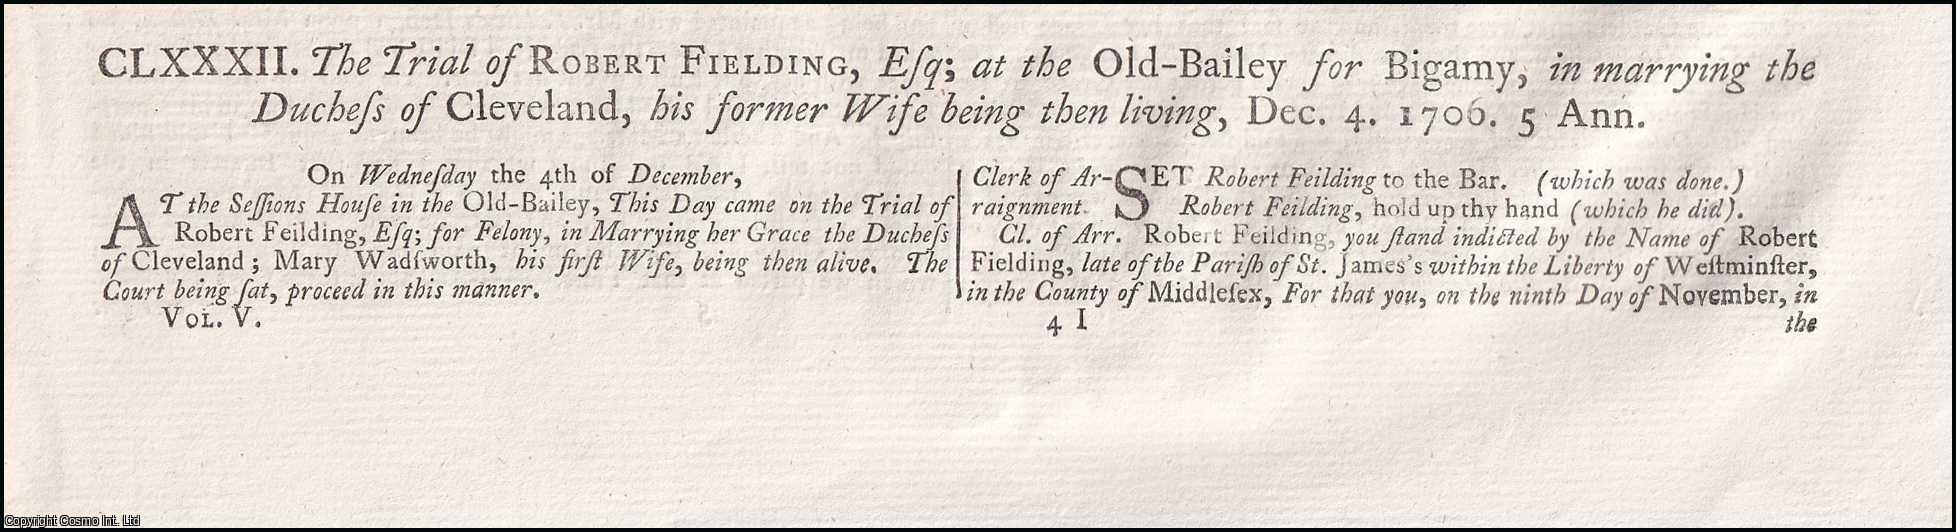 [Trial]. - The Trial of Robert Fielding, Esq ; at the Old-Bailey for Bigamy, in Marrying the Duchess of Cleveland, his former Wife being then living, December 4th, 1706. An original report from the Collected State Trials.